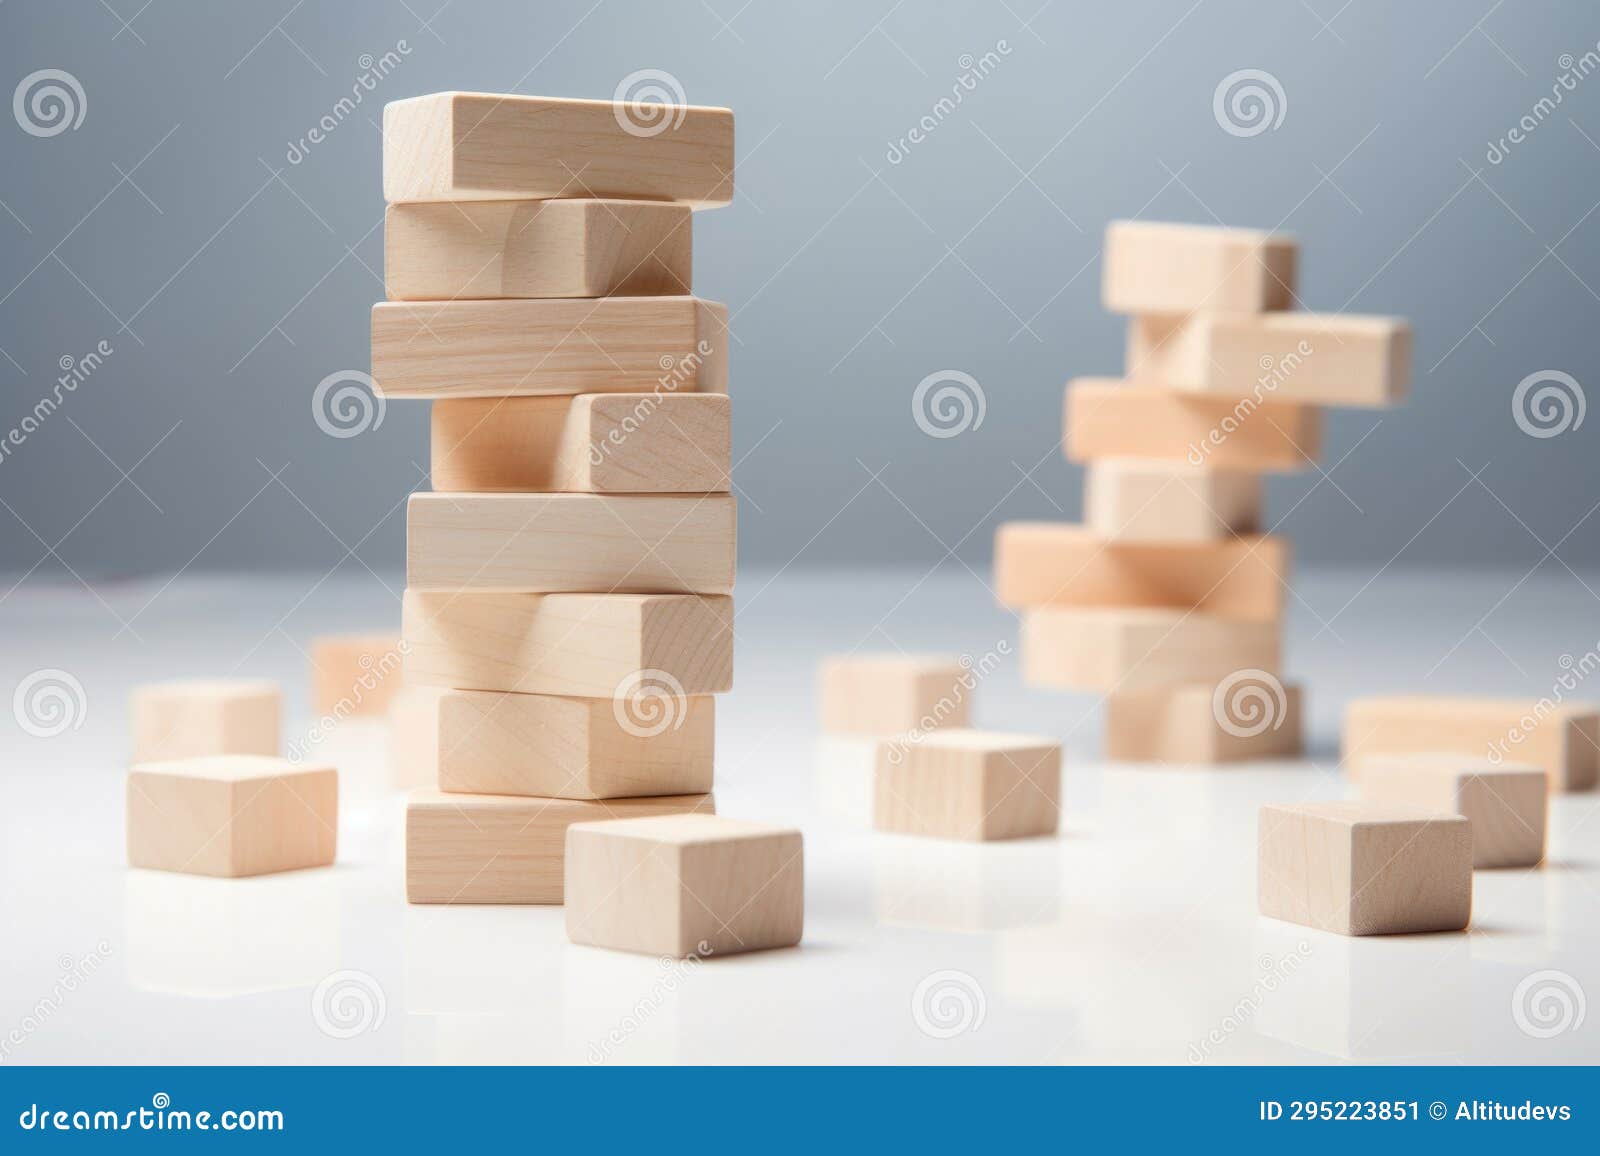 tower of wooden blocks ready to topple